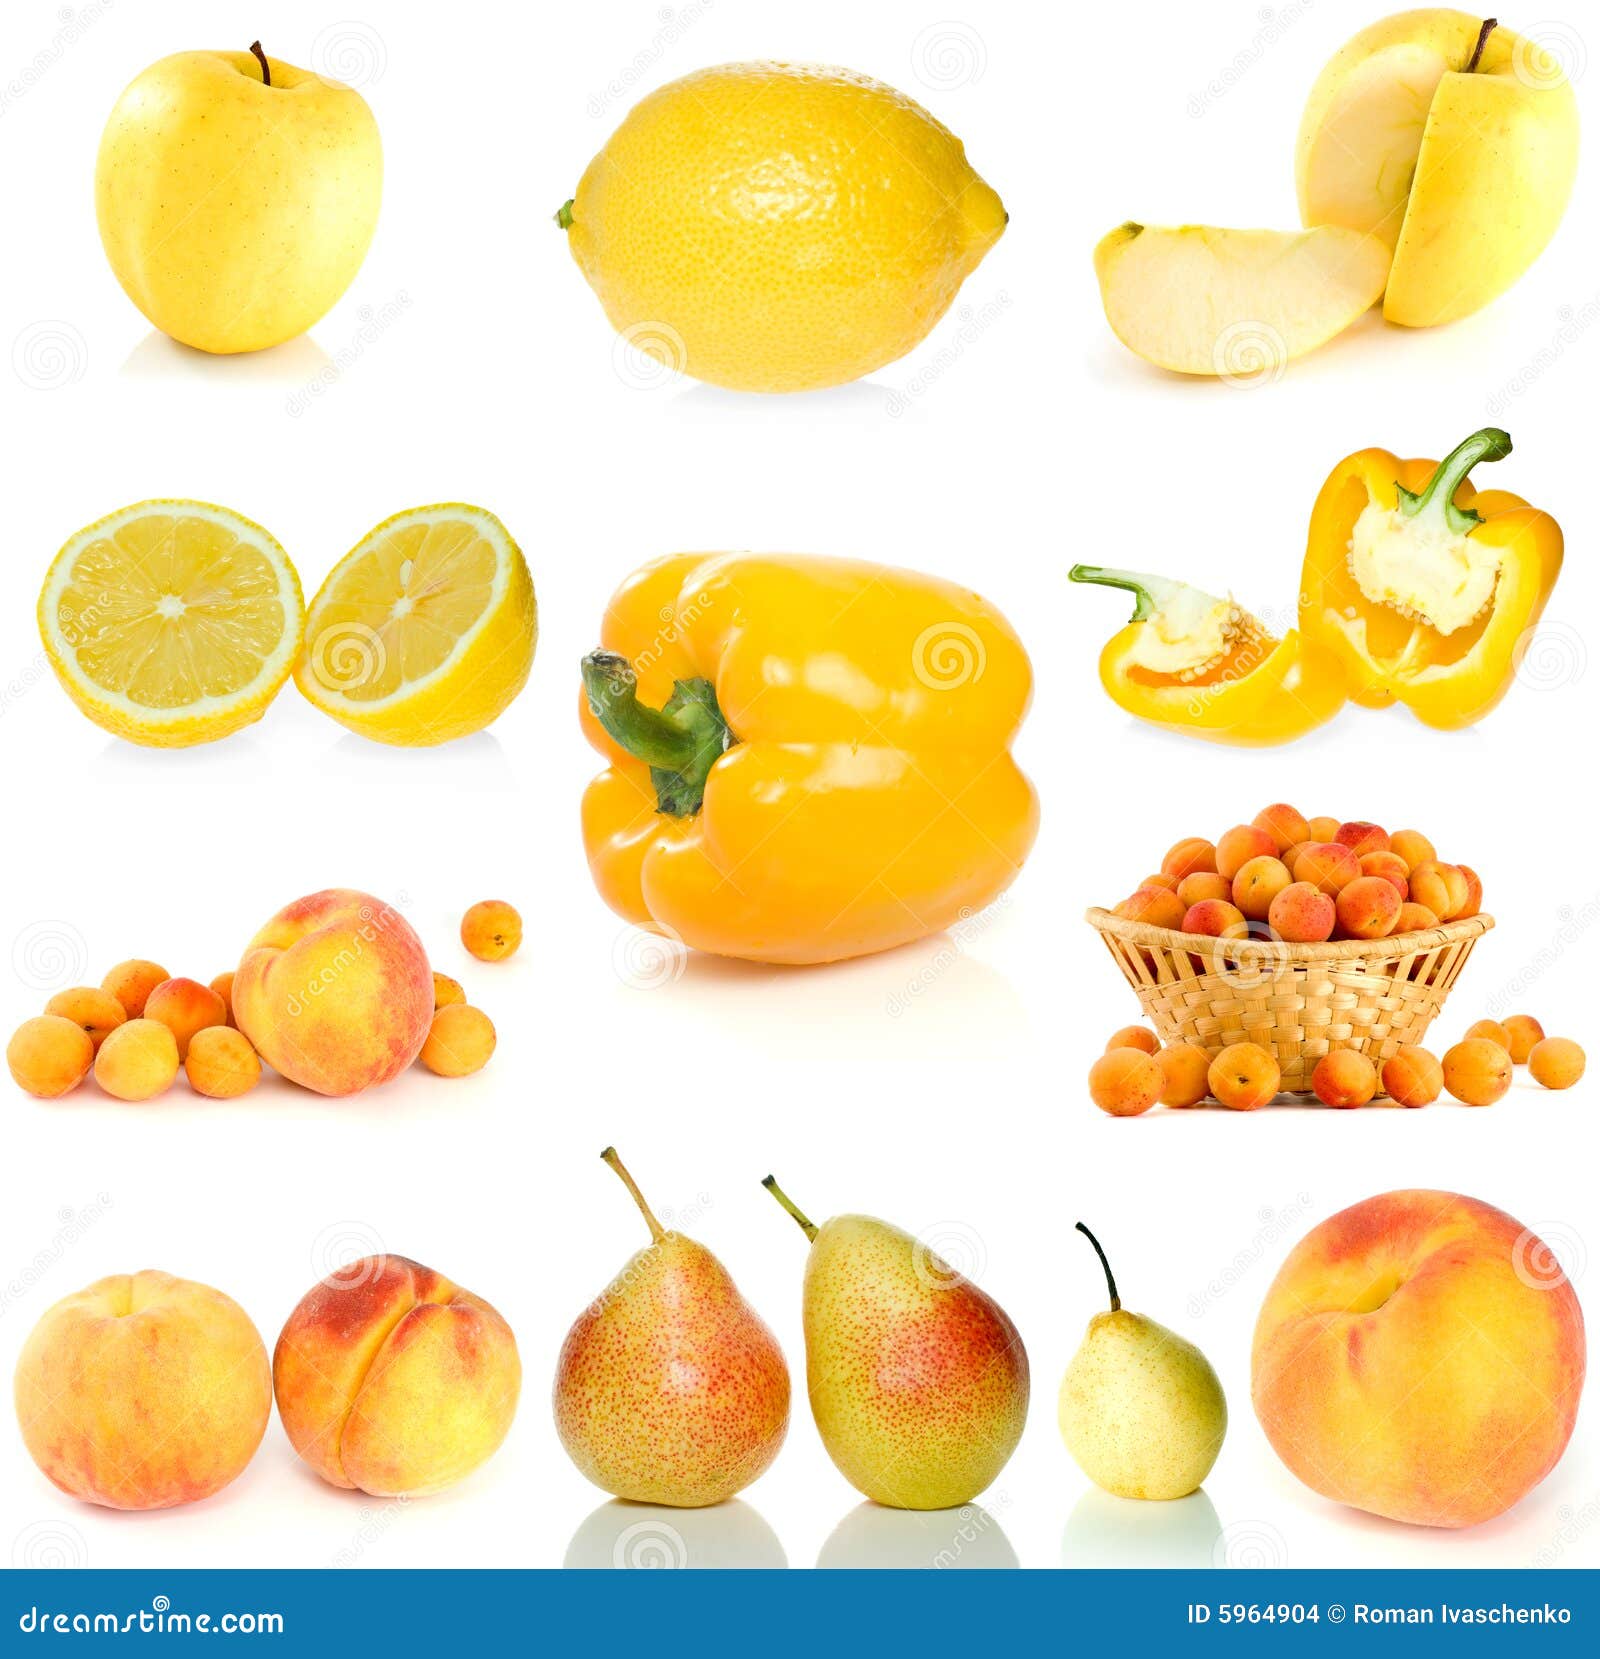 Set Of Yellow Fruit, Berries And Vegetables Stock Photo - Image of ...